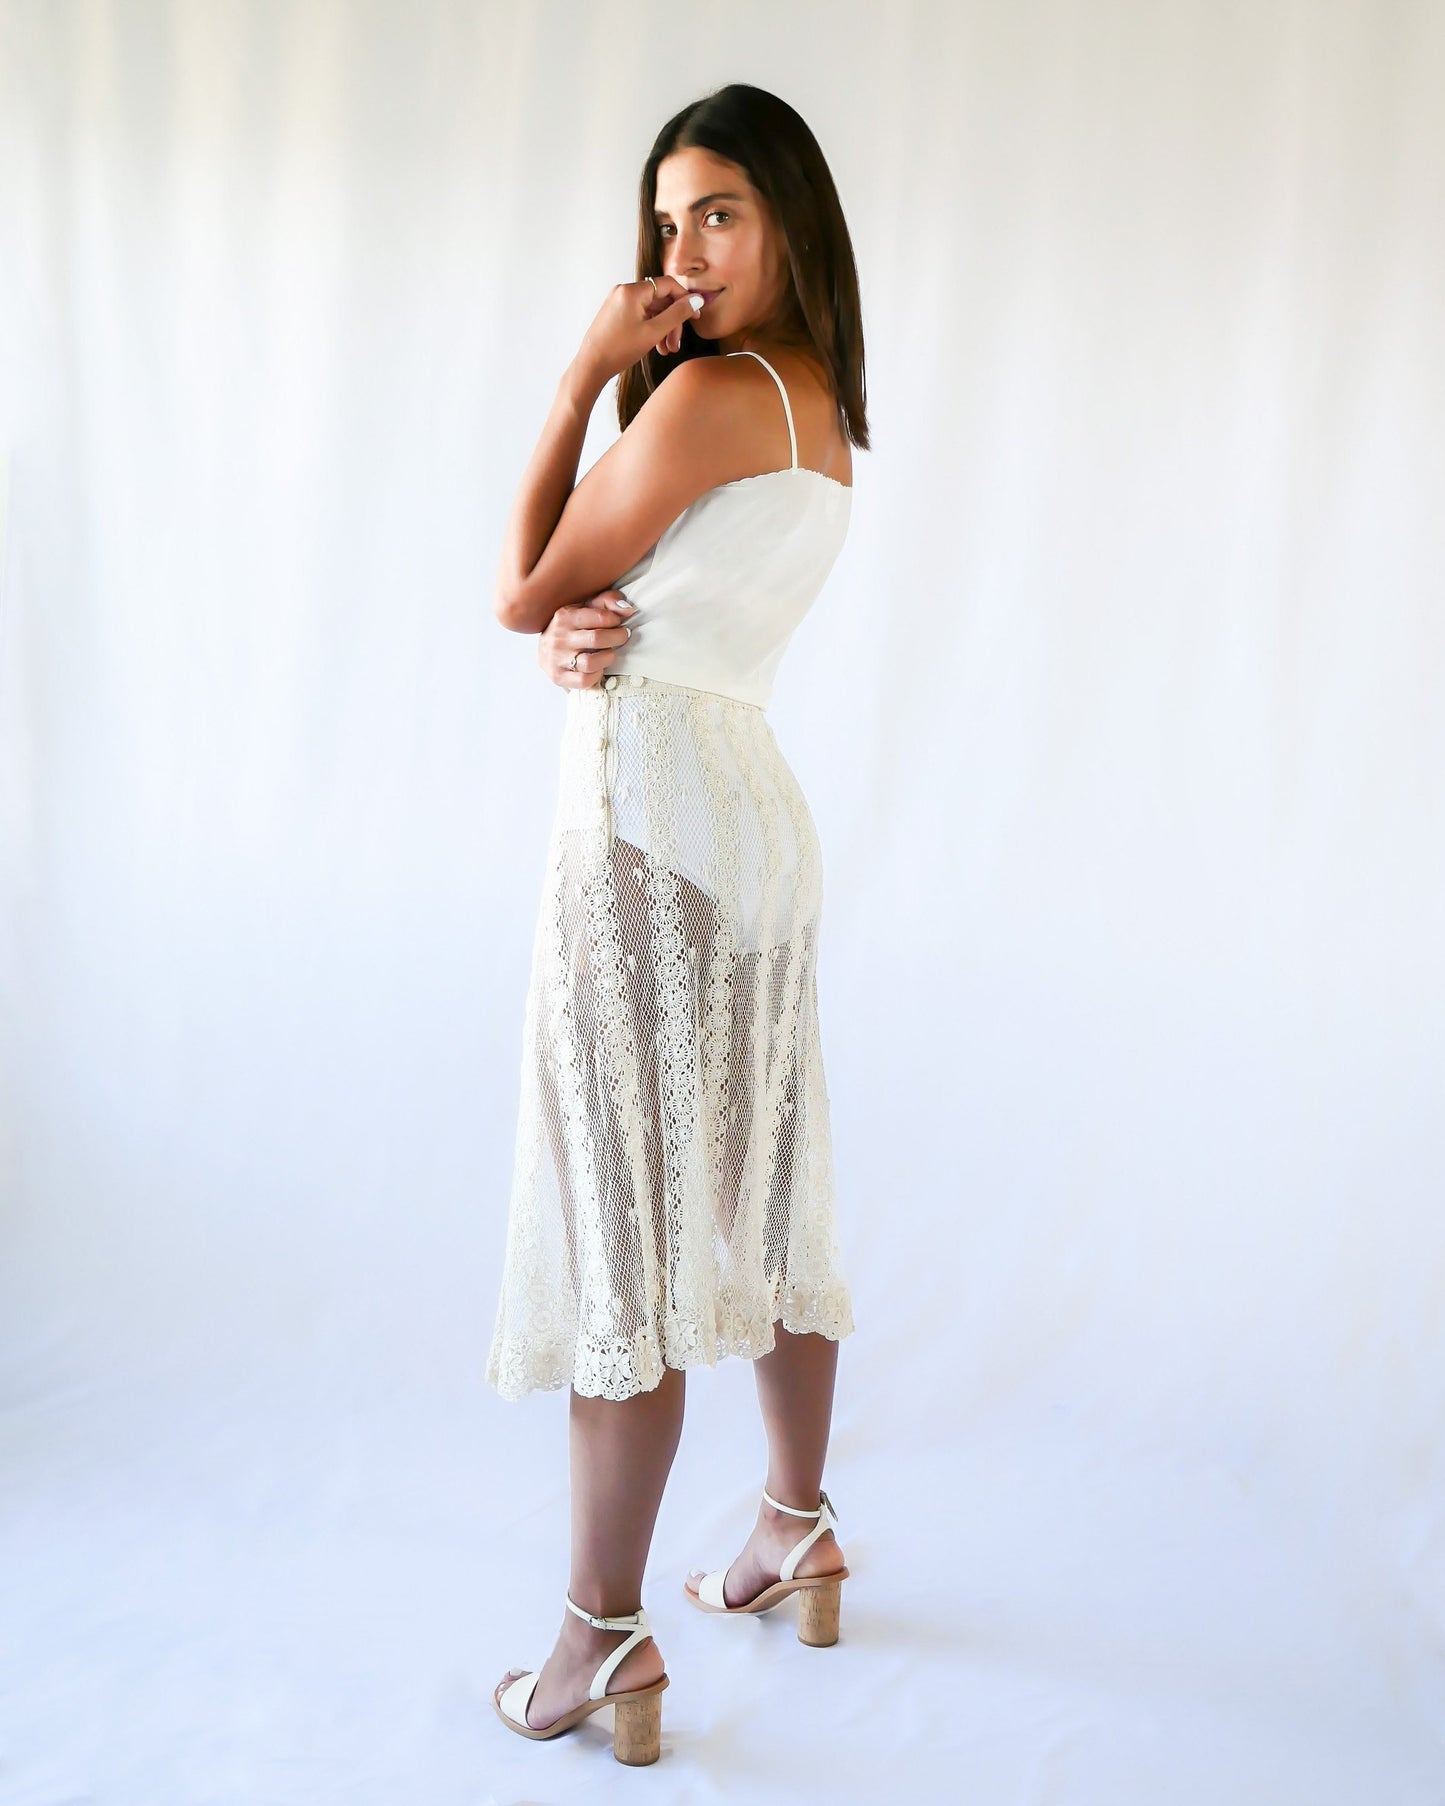 This Lim's Vintage crochet skirt is made with very fine threads to form a delicate net-like pattern throughout, coupled with vertical stripes made of linking pinwheel shaped circles, and a floral motif hem. The skirt is slightly stretchable and comes with a comfortable elastic waistband and buttons up one side of the waist.